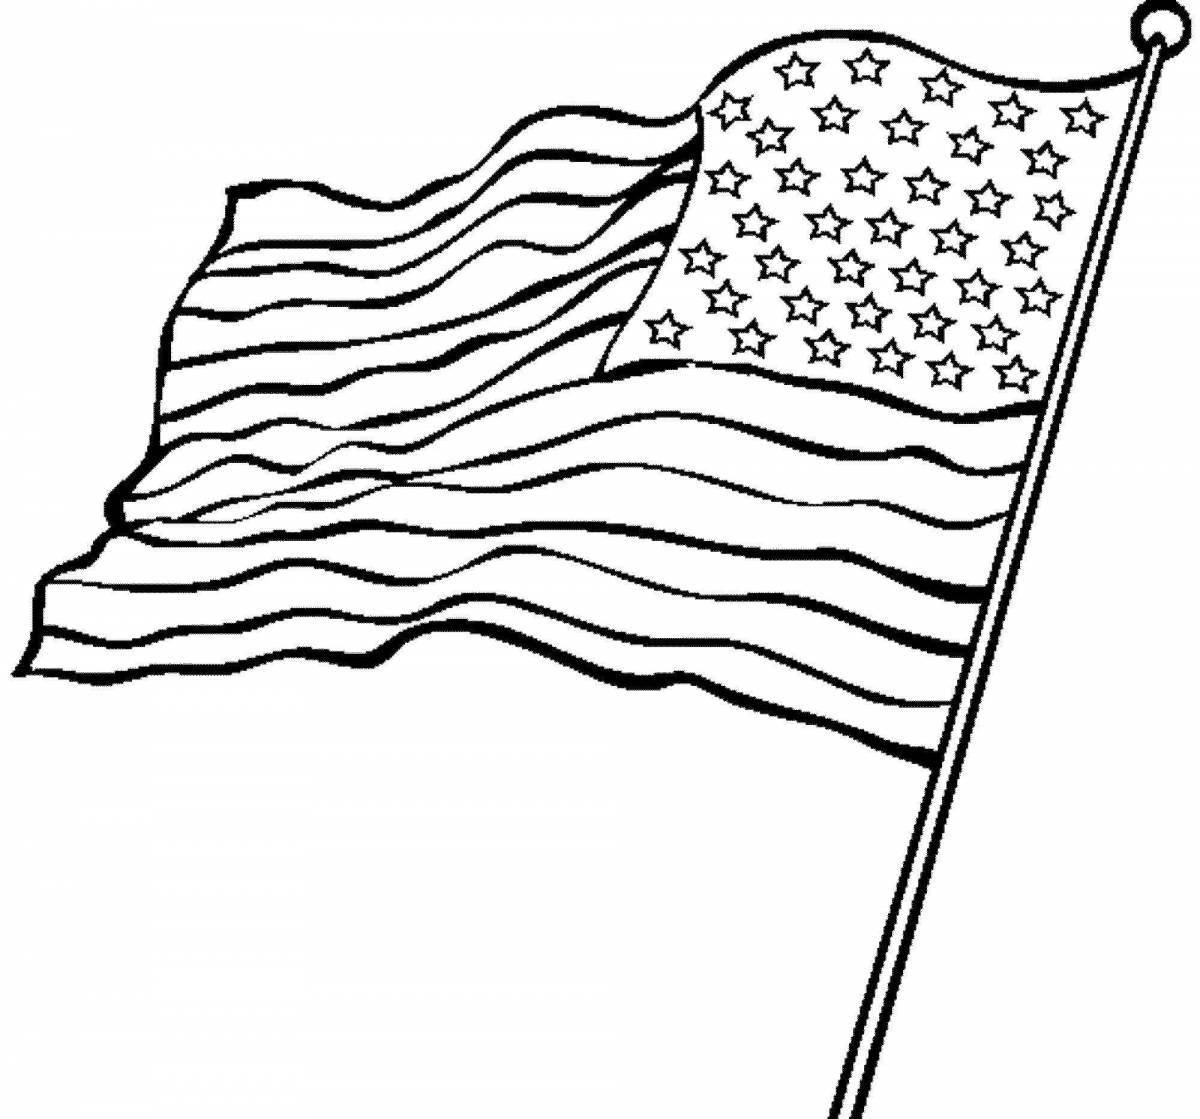 Glitter American flag coloring page